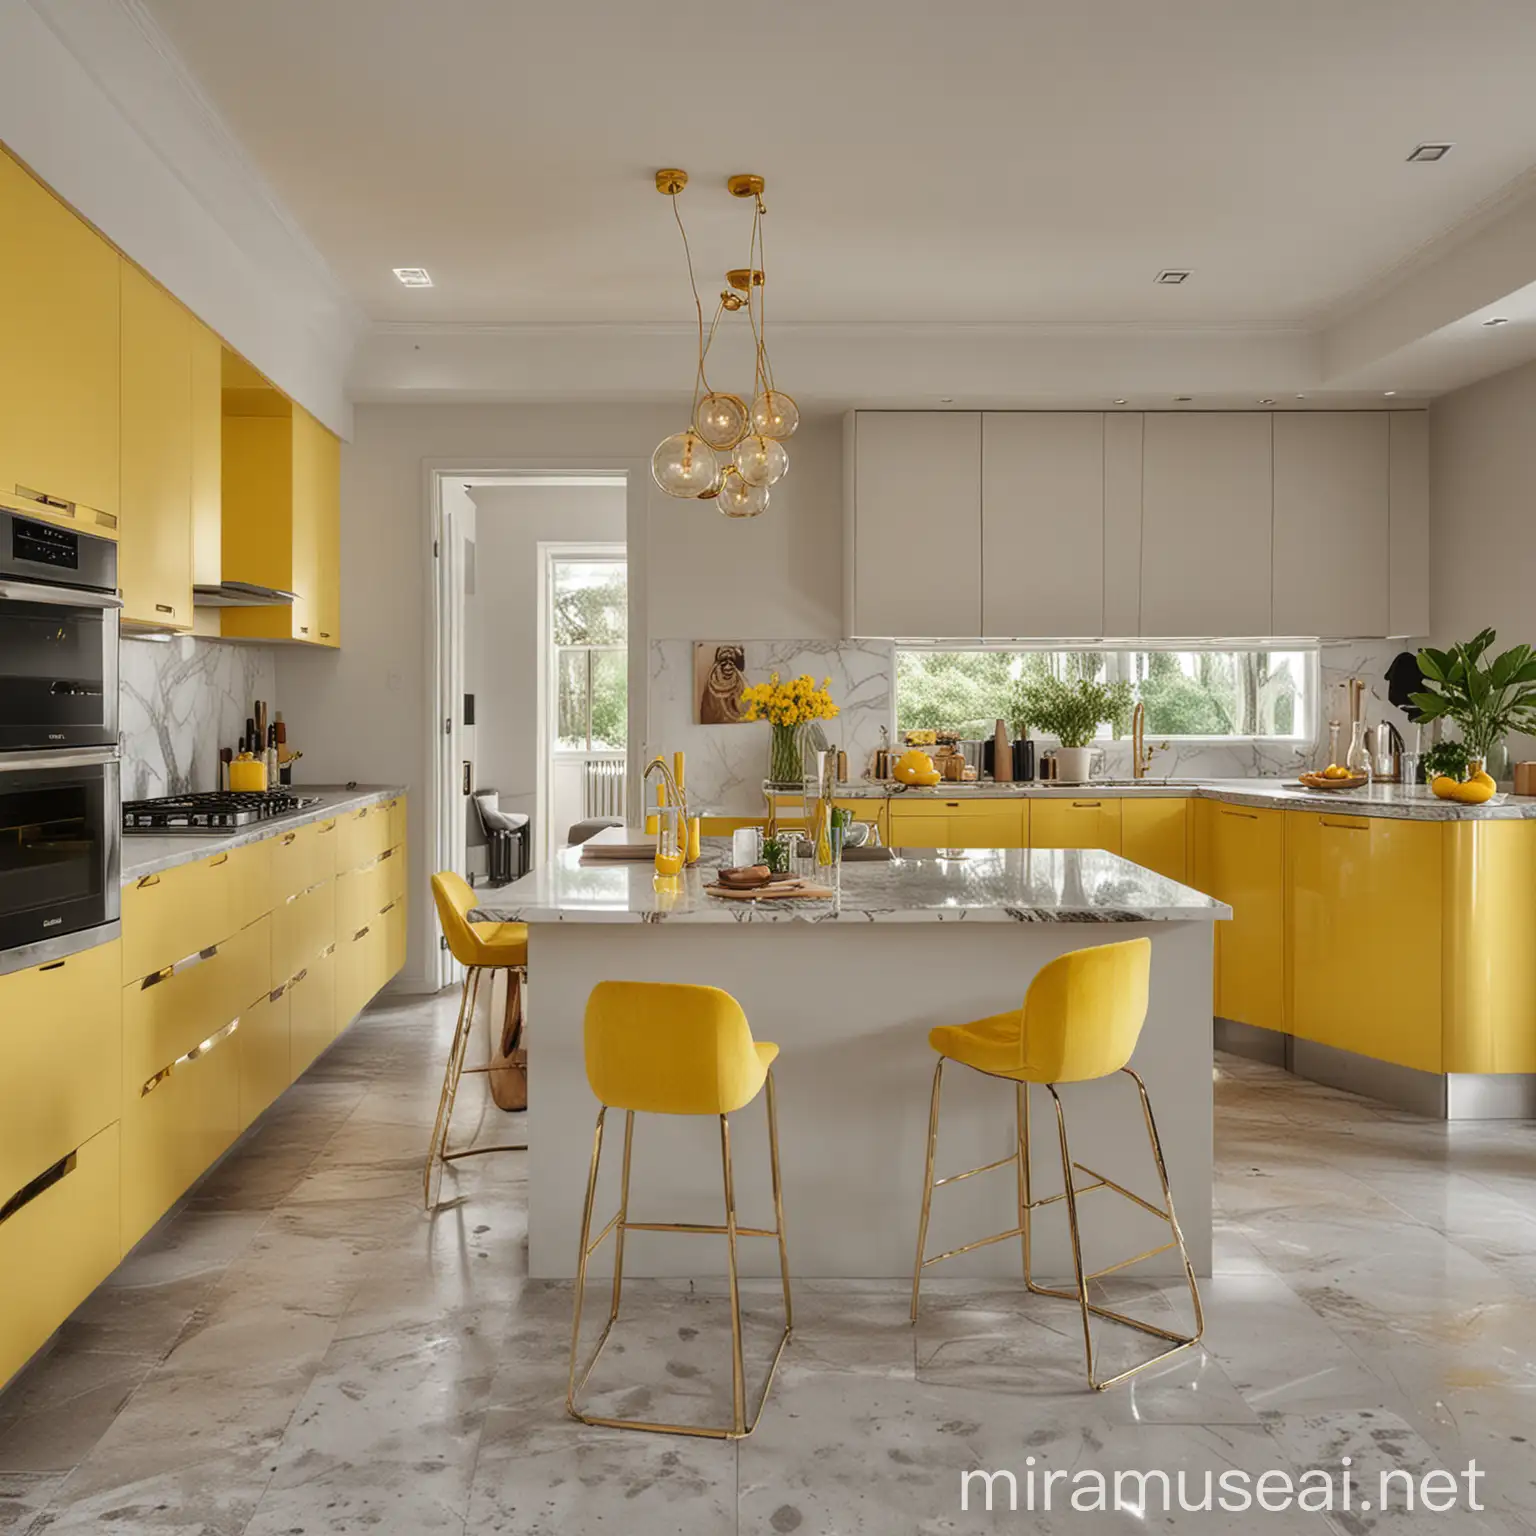 Make a luxurious modern kitchen with yellow details